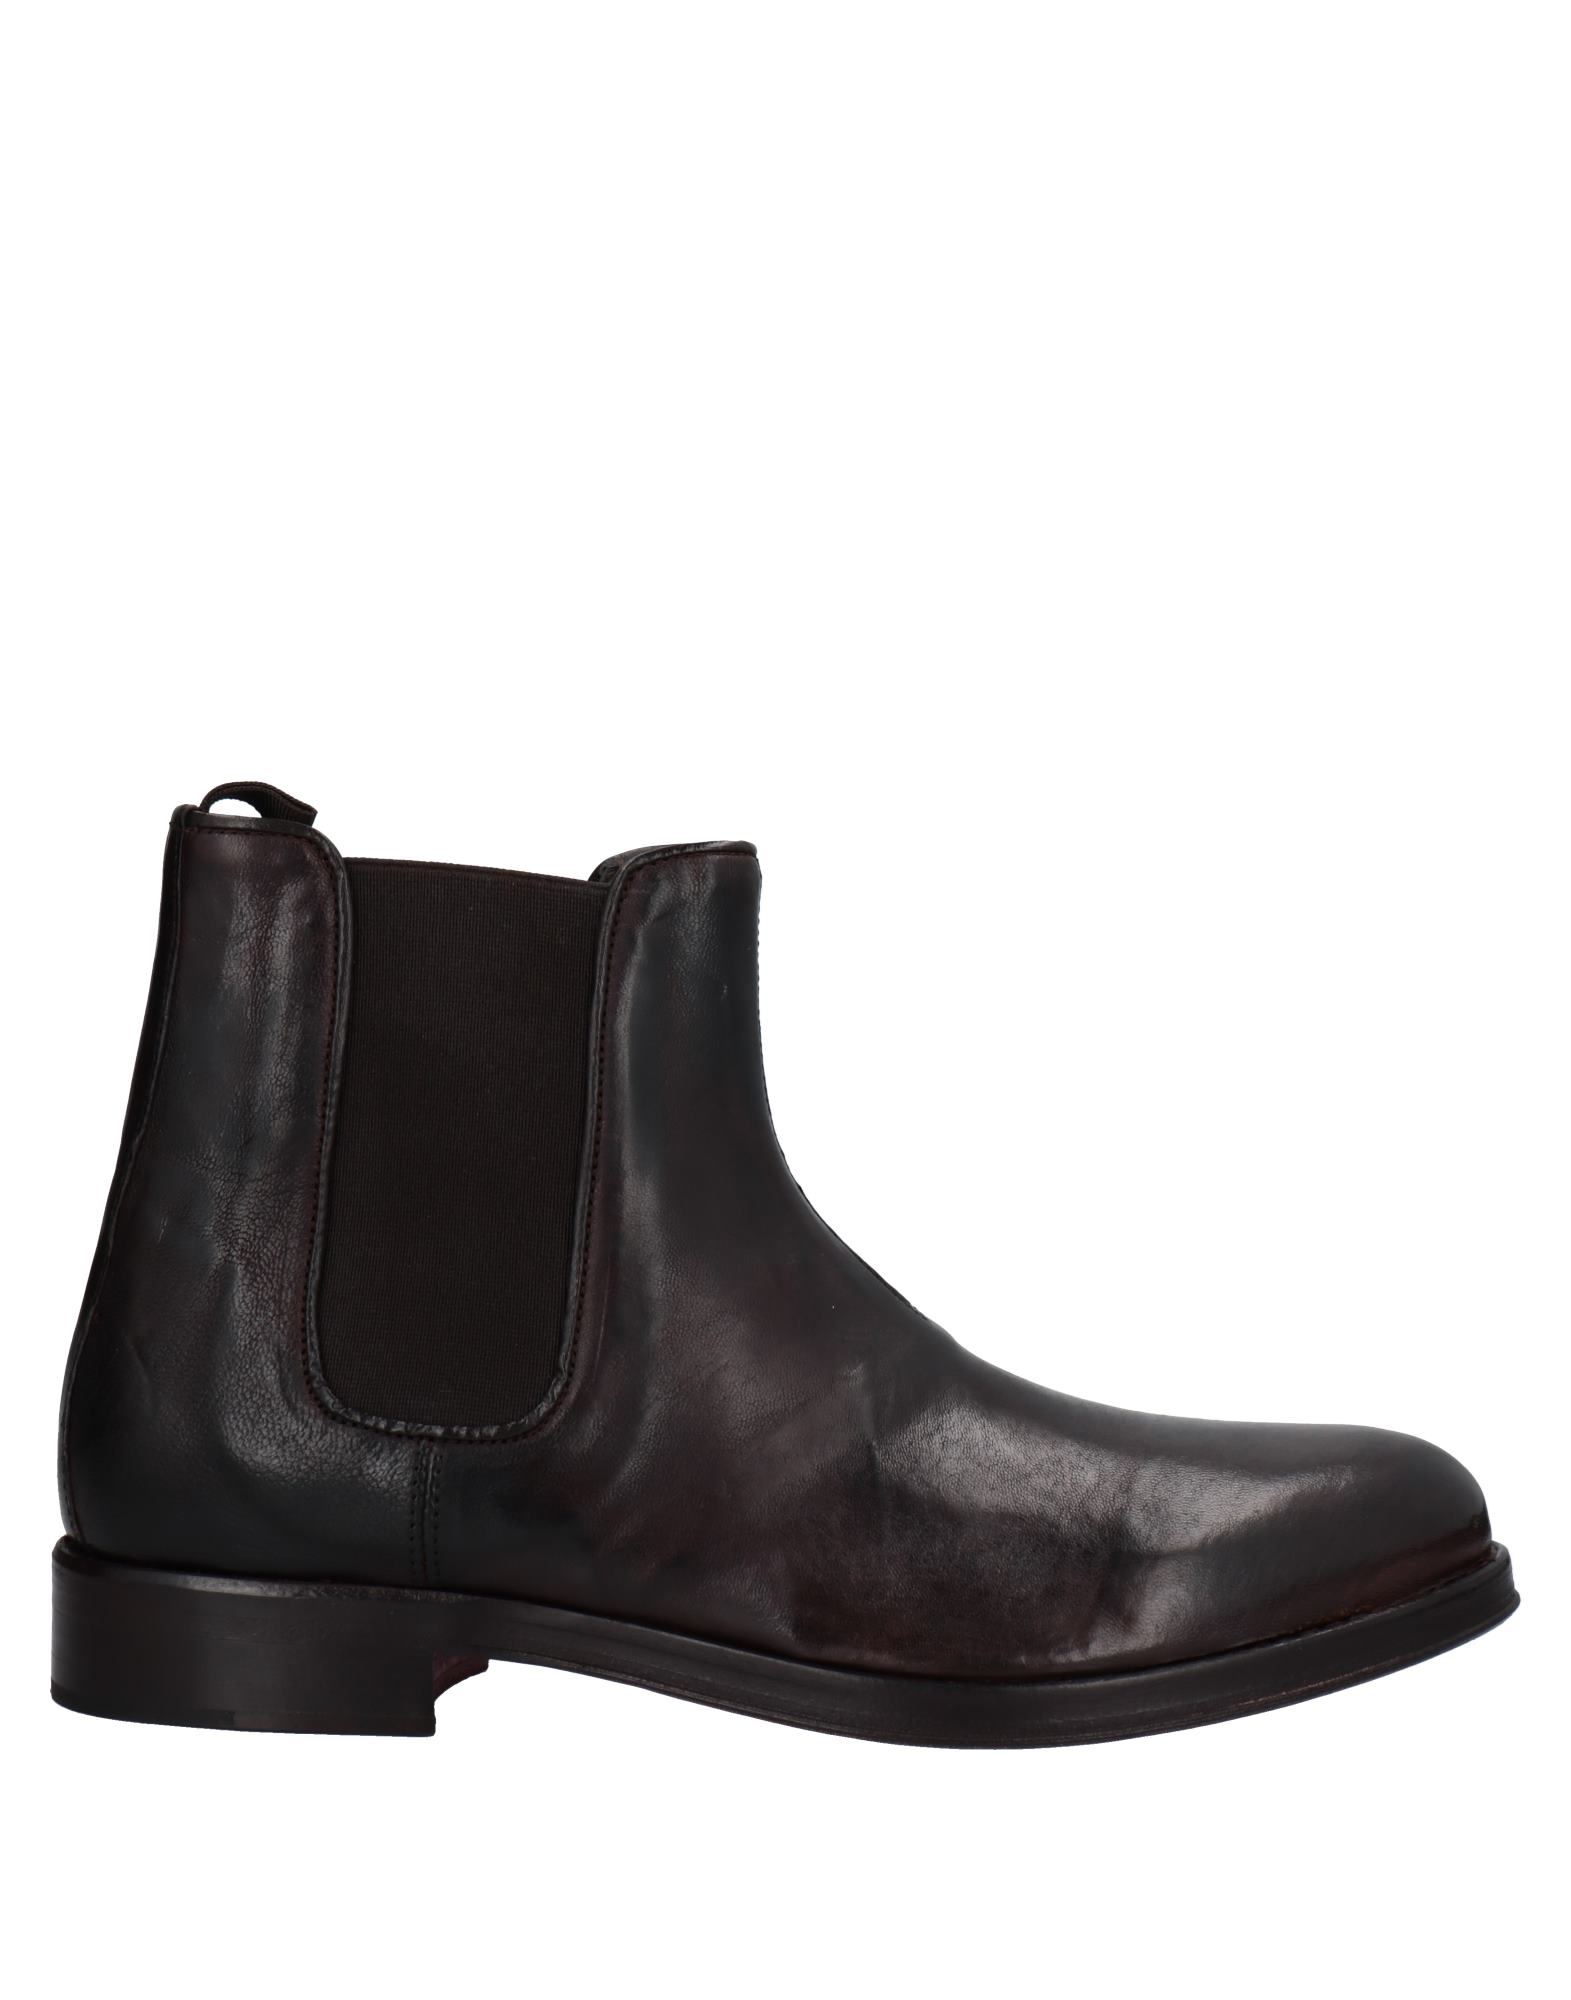 6 Punto 9 Ankle Boots In Dark Brown | ModeSens